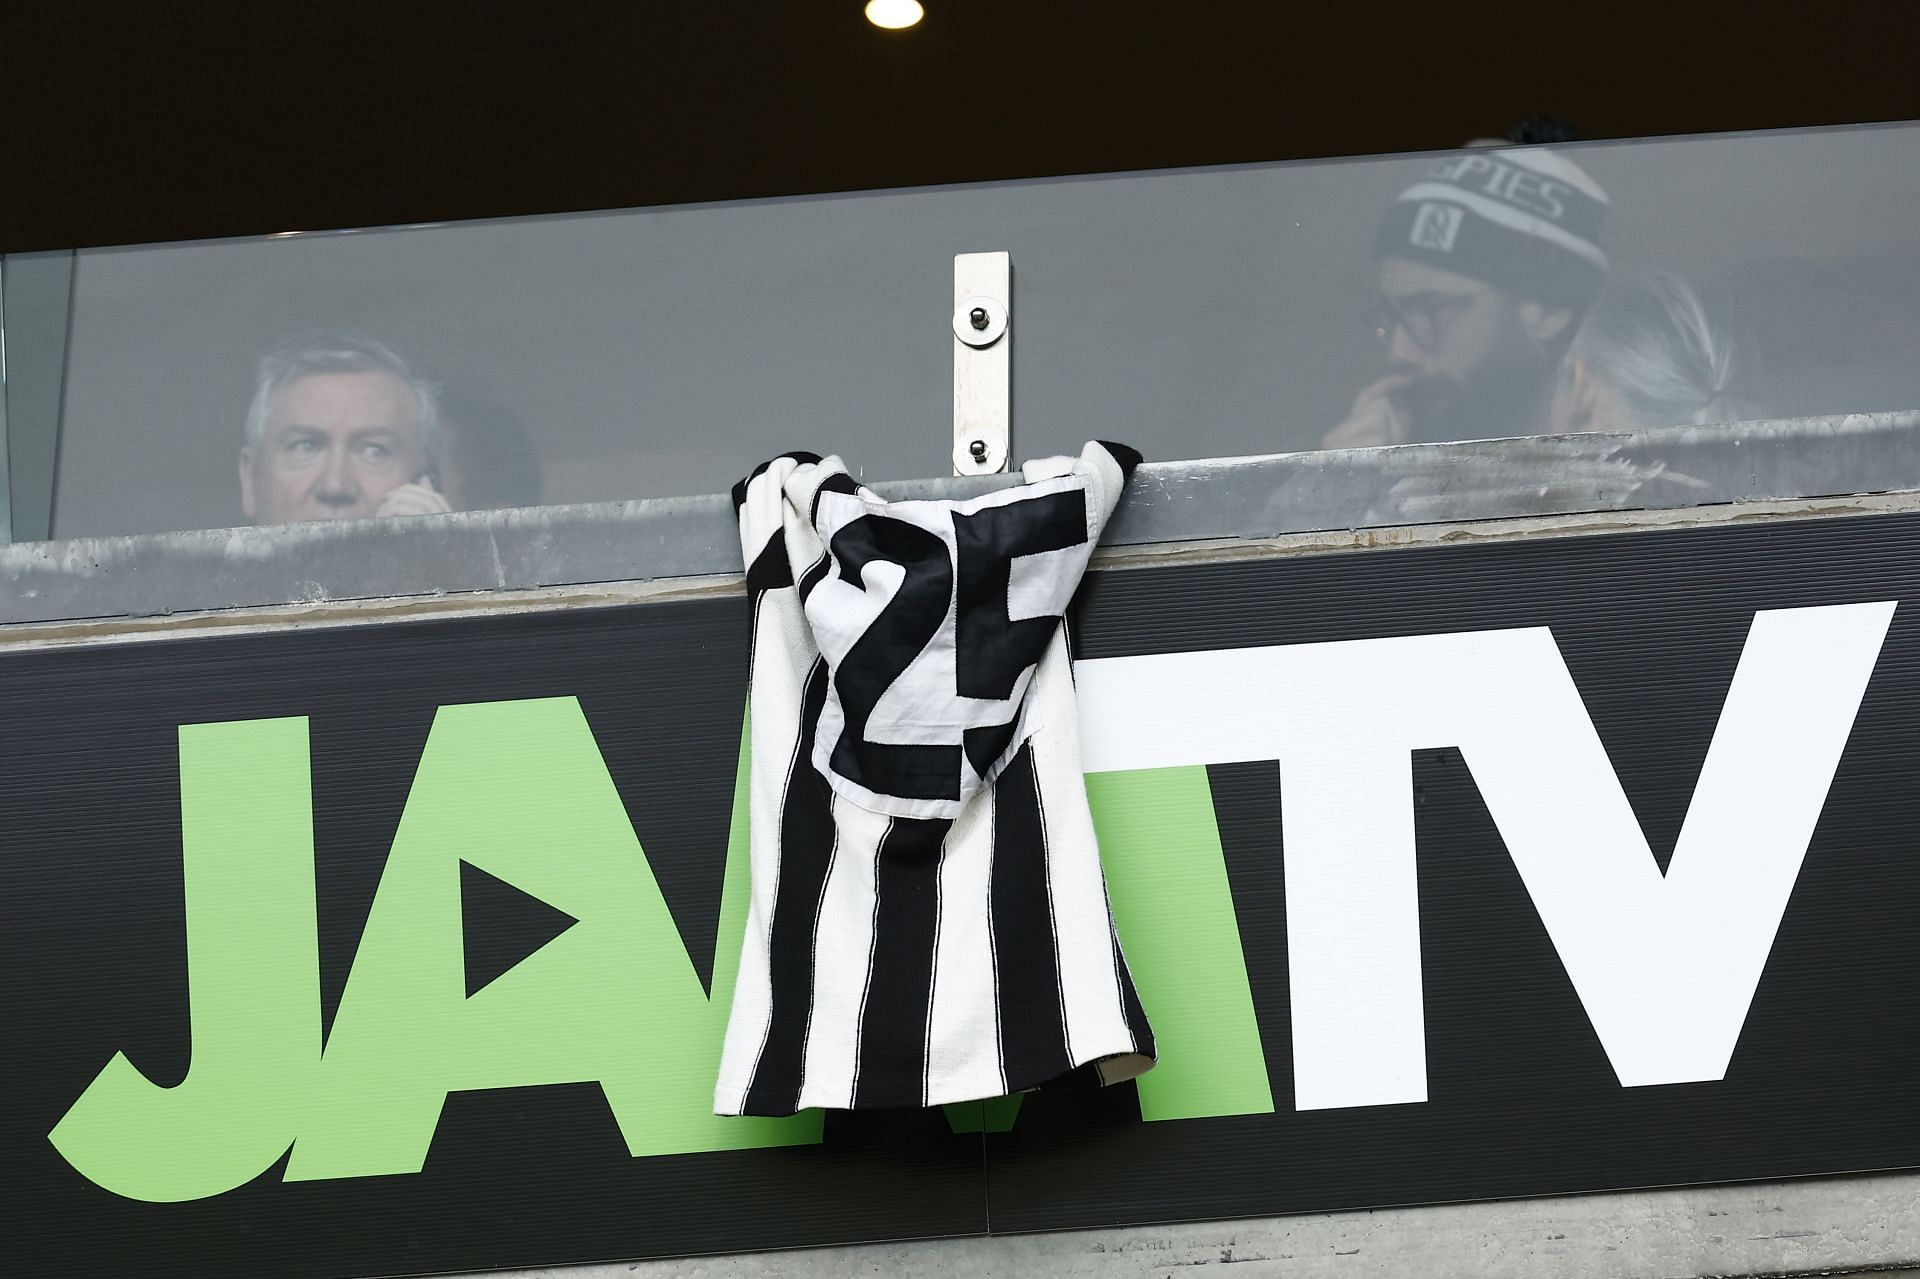 Former Collingwood president Eddie McGuire hangs a number 25 Collingwood jumper from the window of the media box paying tribute to former player Billy Picken on July 24, 2022